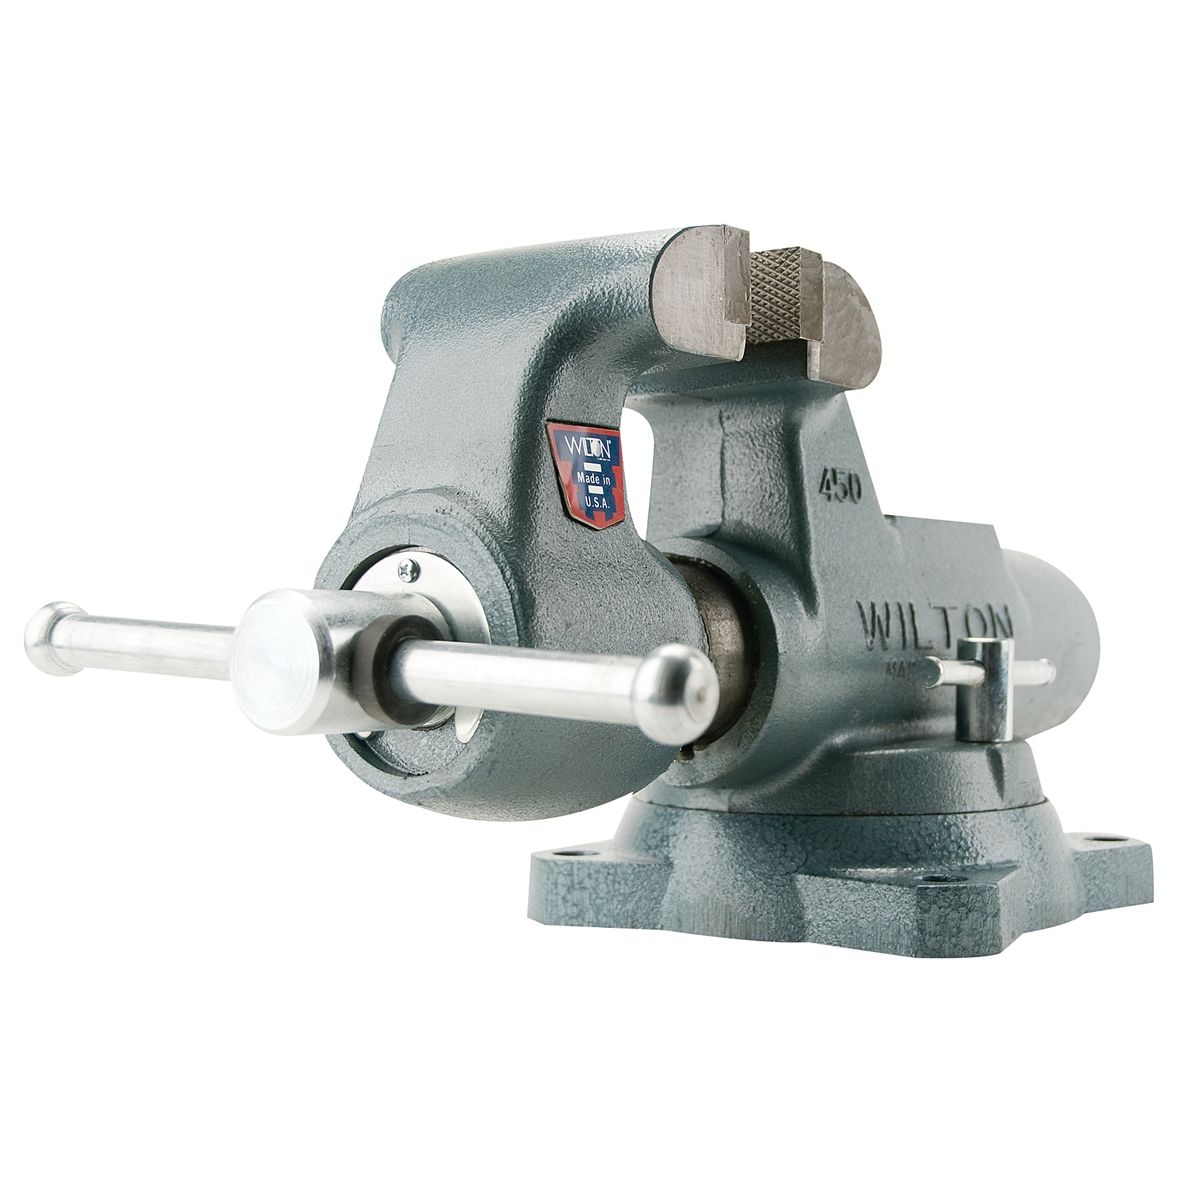 800S Machinists Bench Vise, Swivel Base